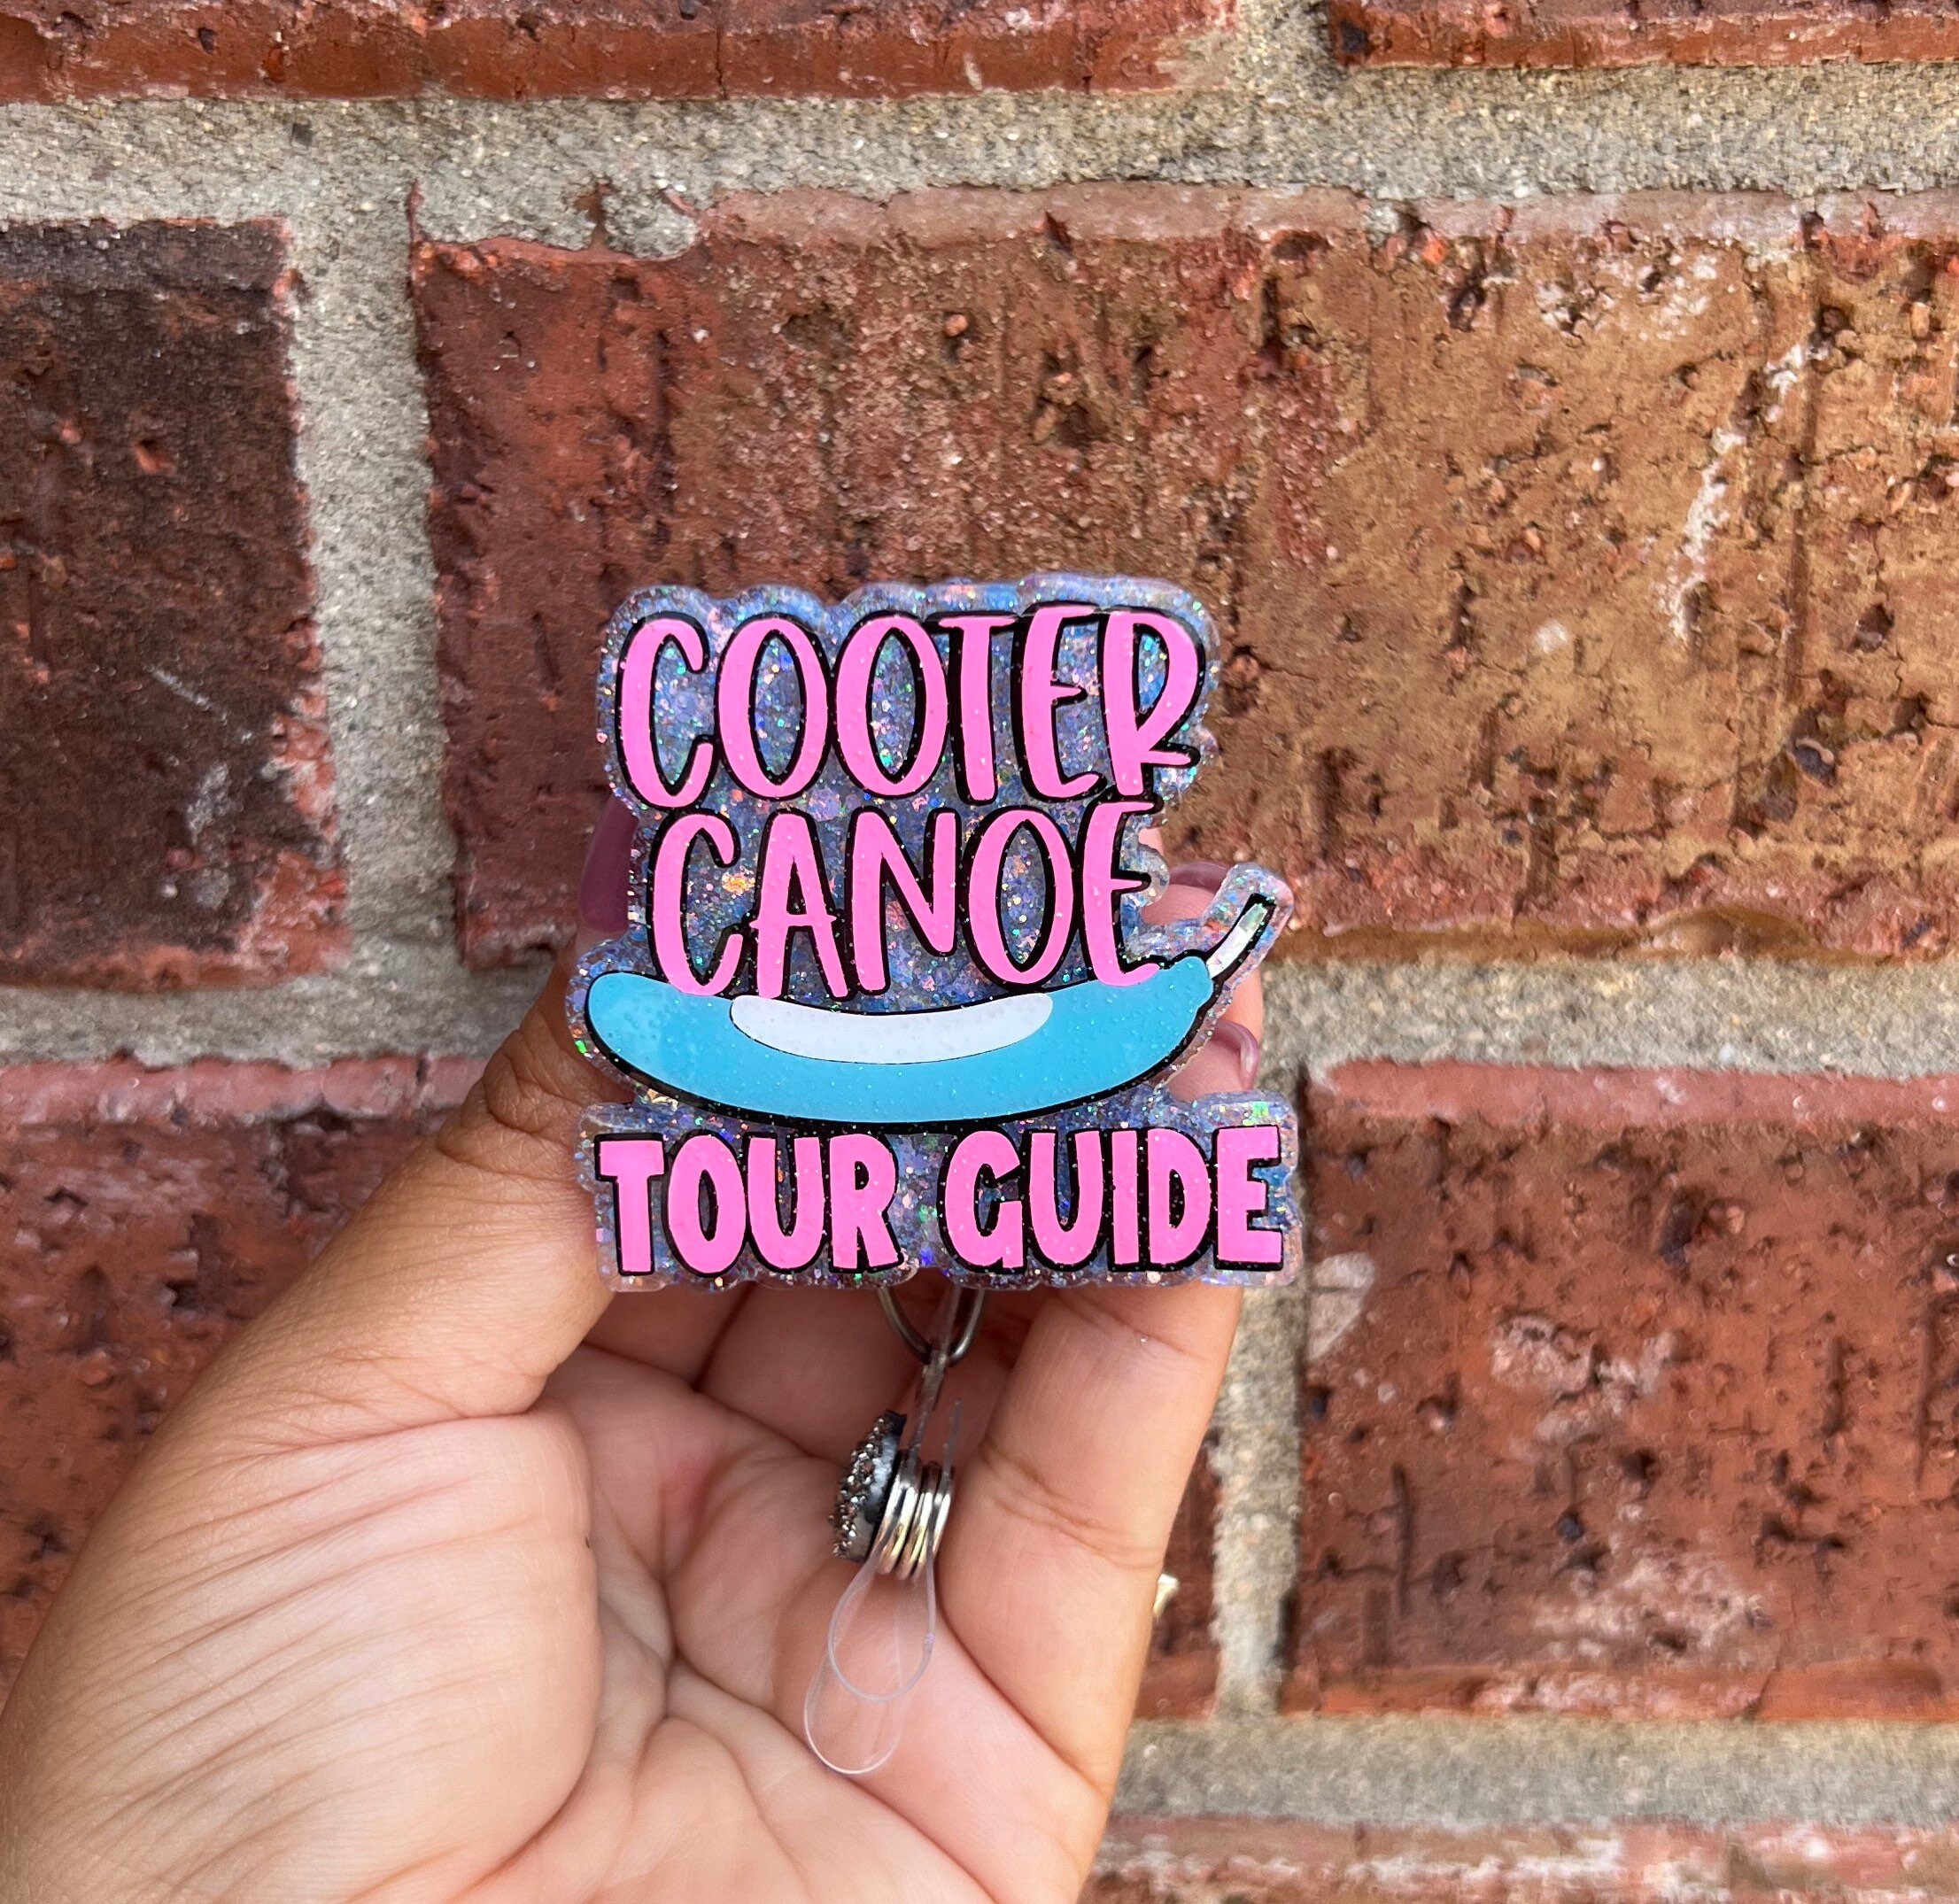 Cooter Canoe Tour Guide Glittery Badge Reel 